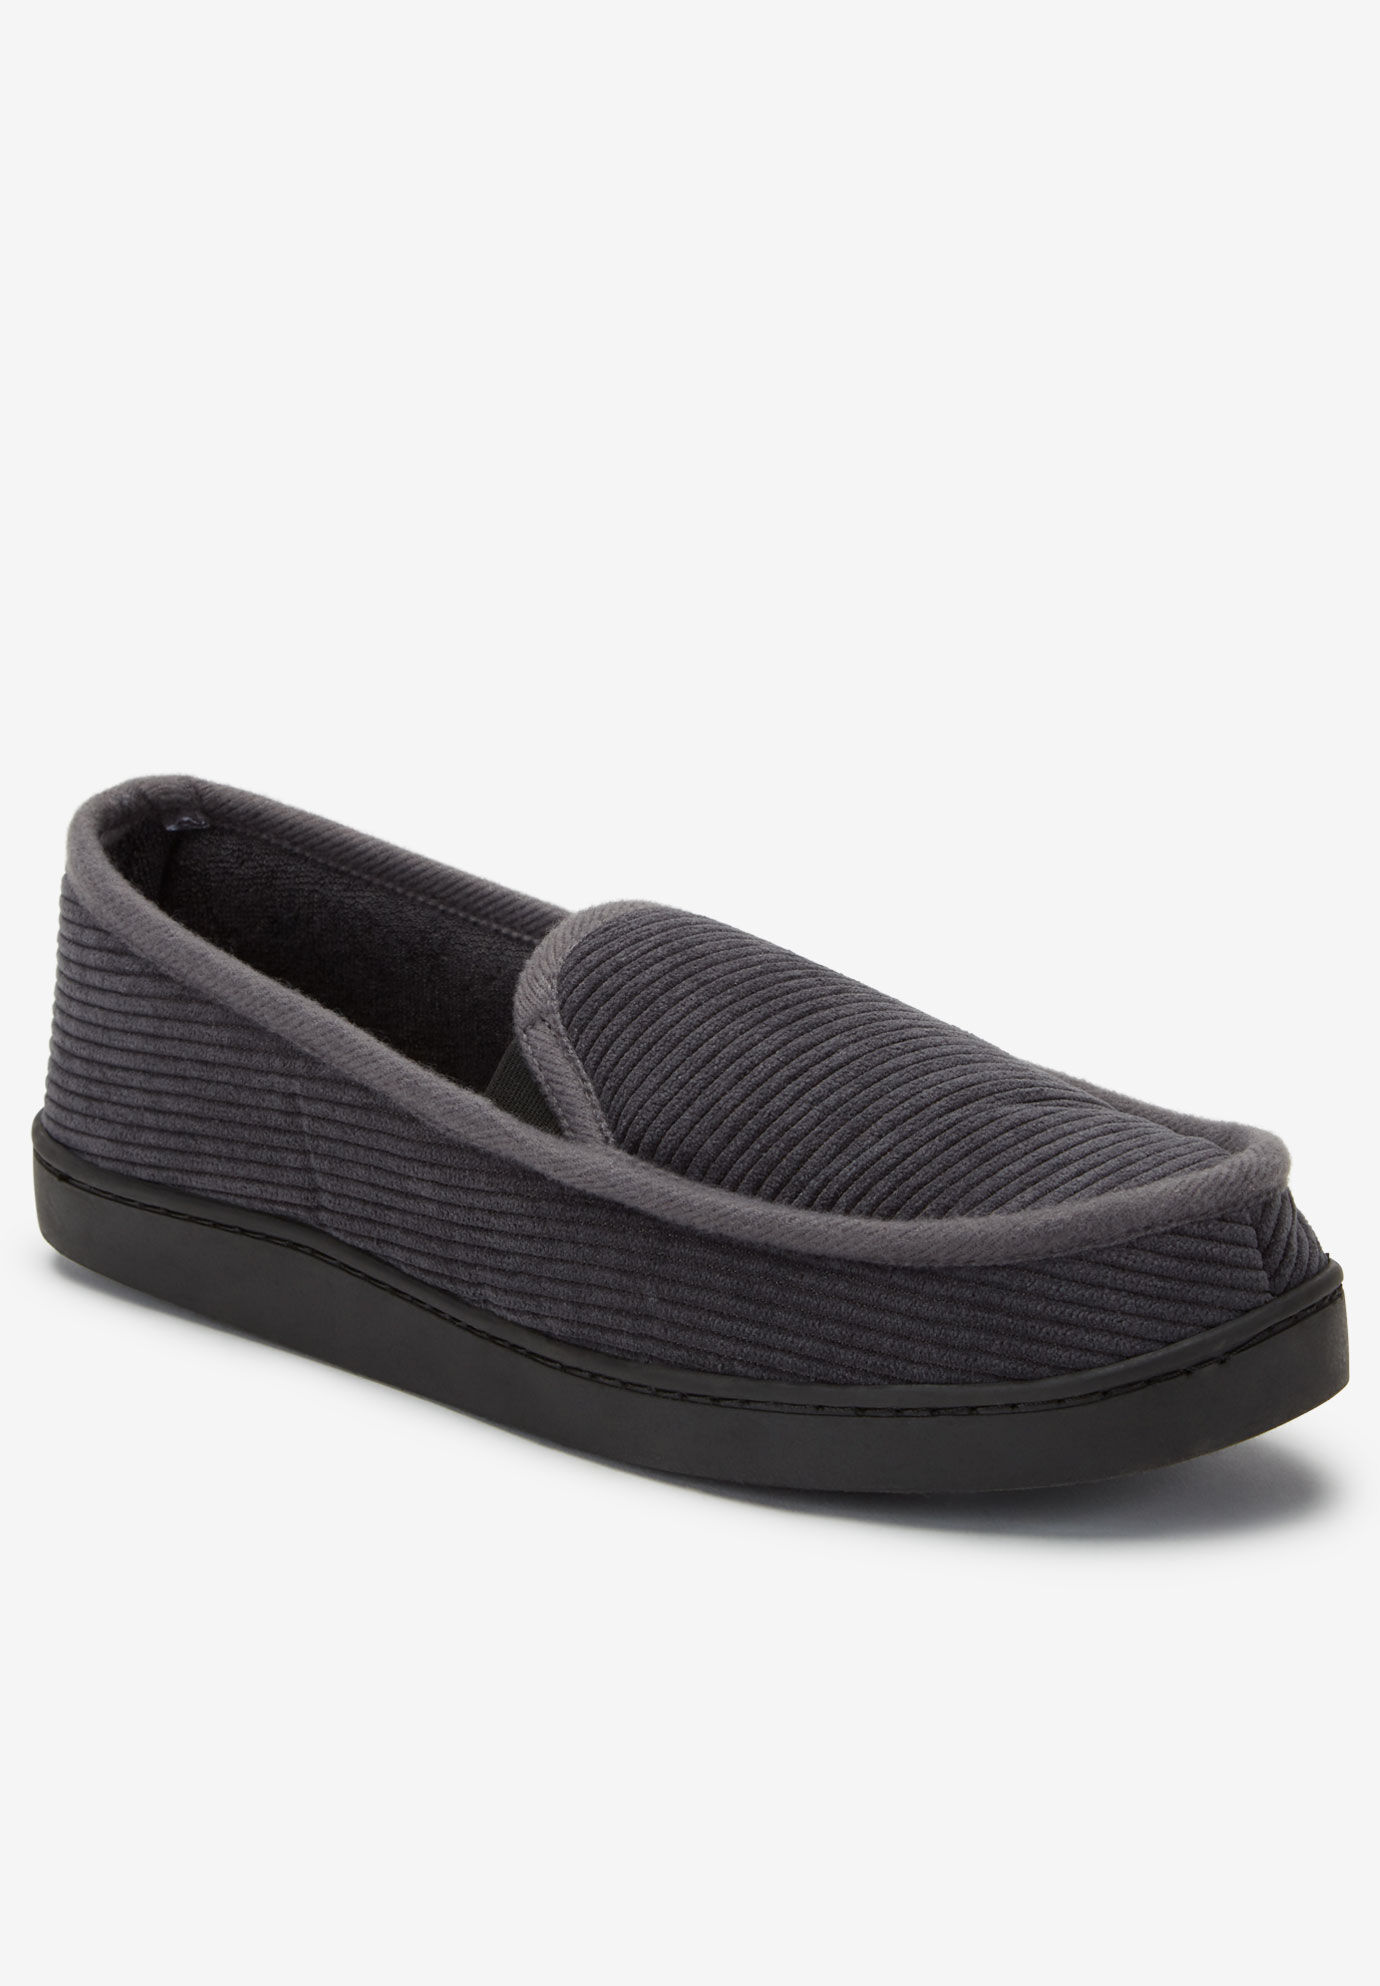 mens slippers 15 wide